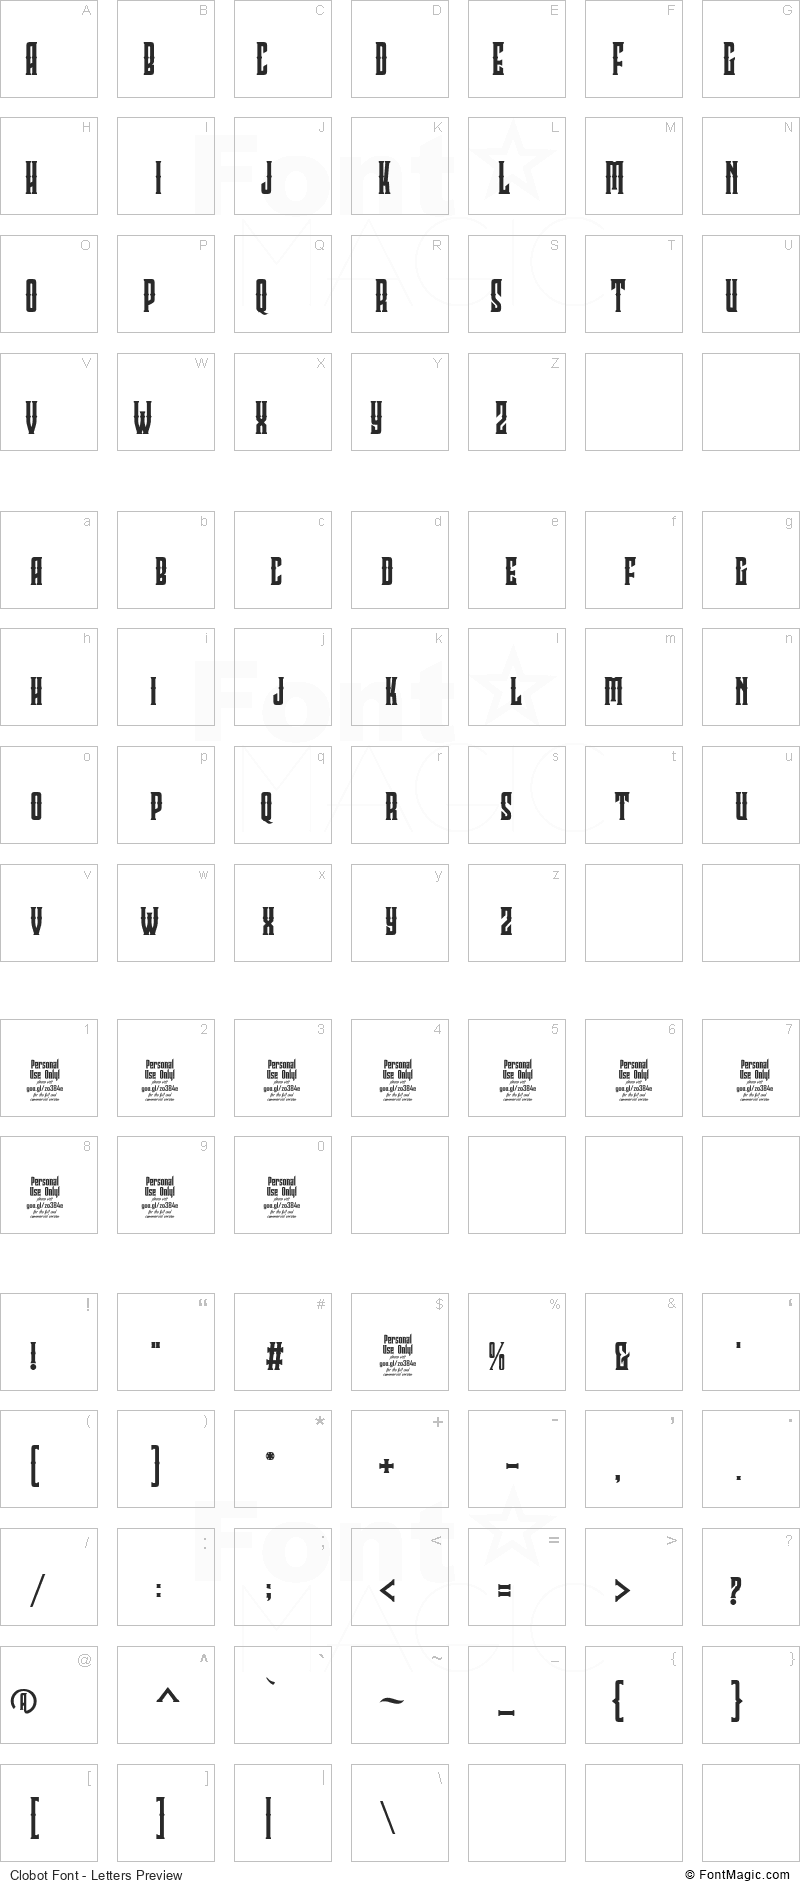 Clobot Font - All Latters Preview Chart